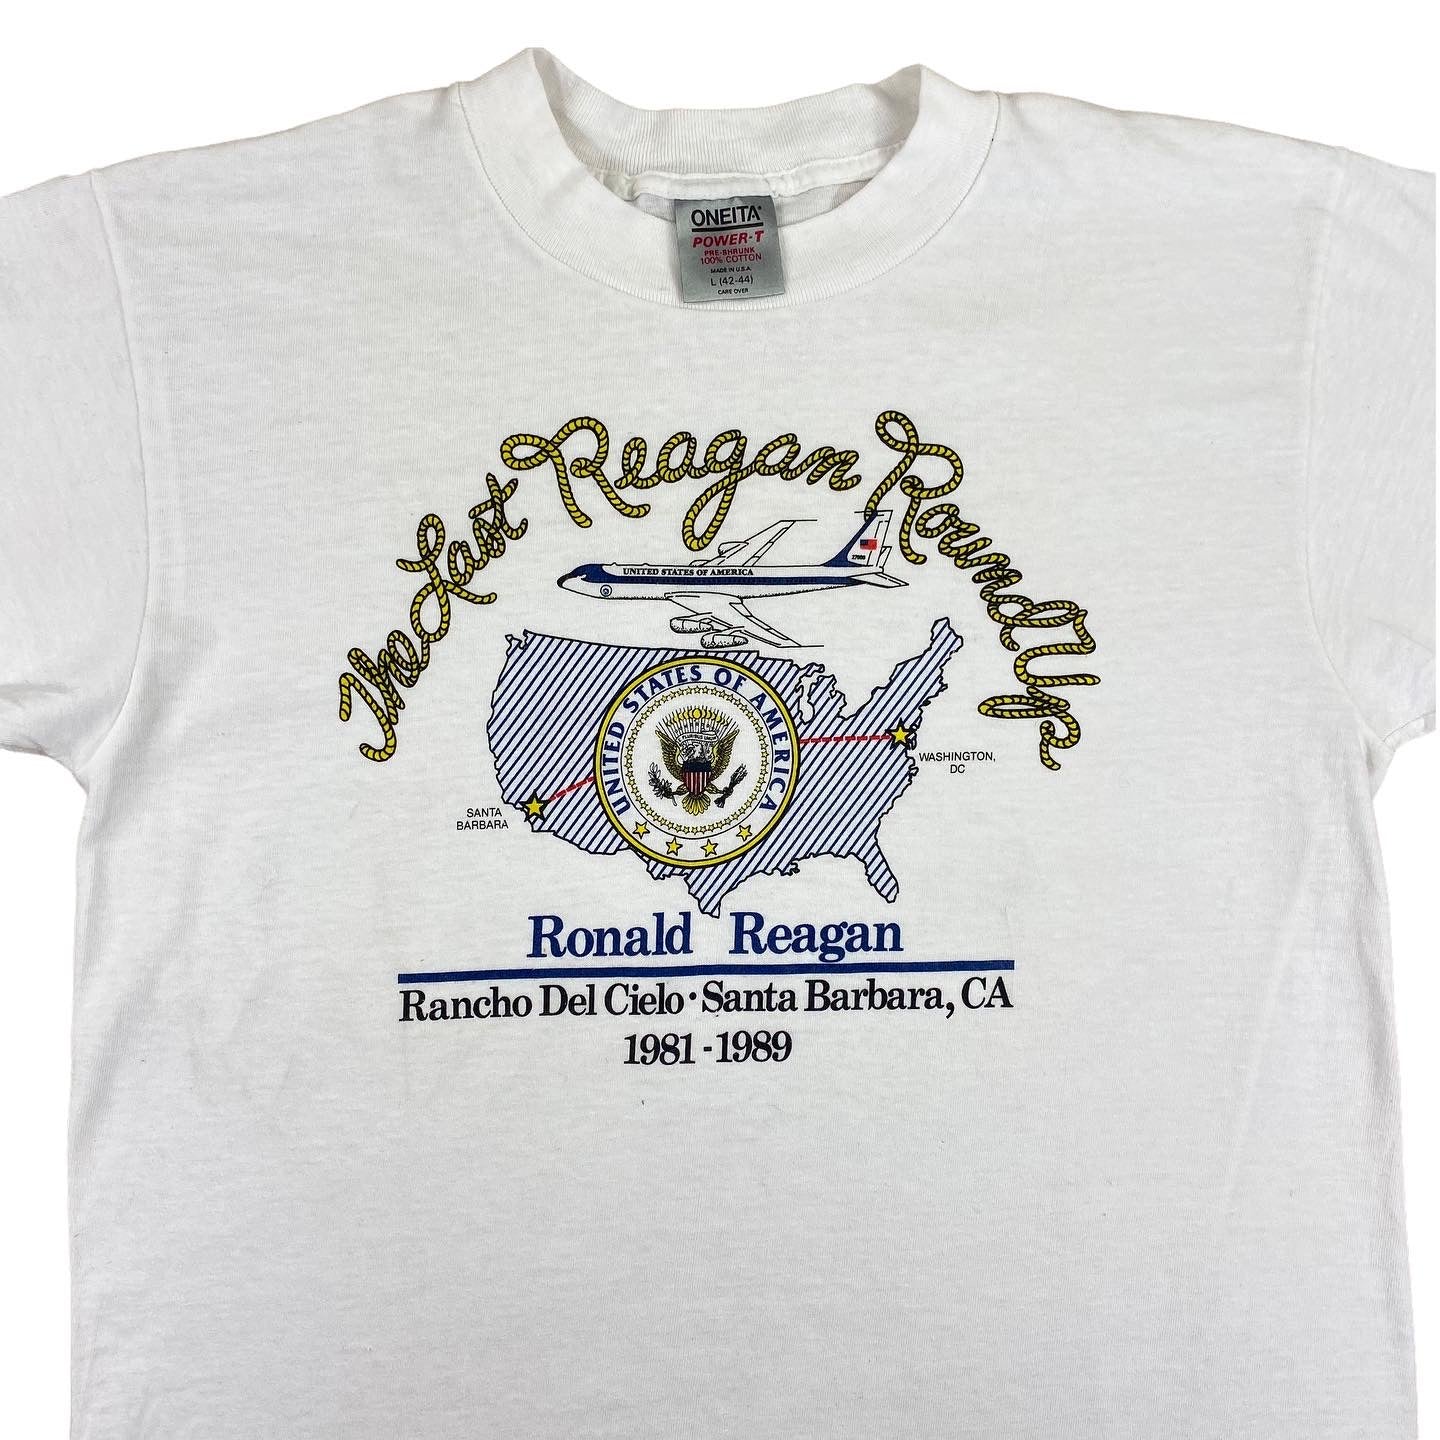 1989 The last reagan round up tee Large